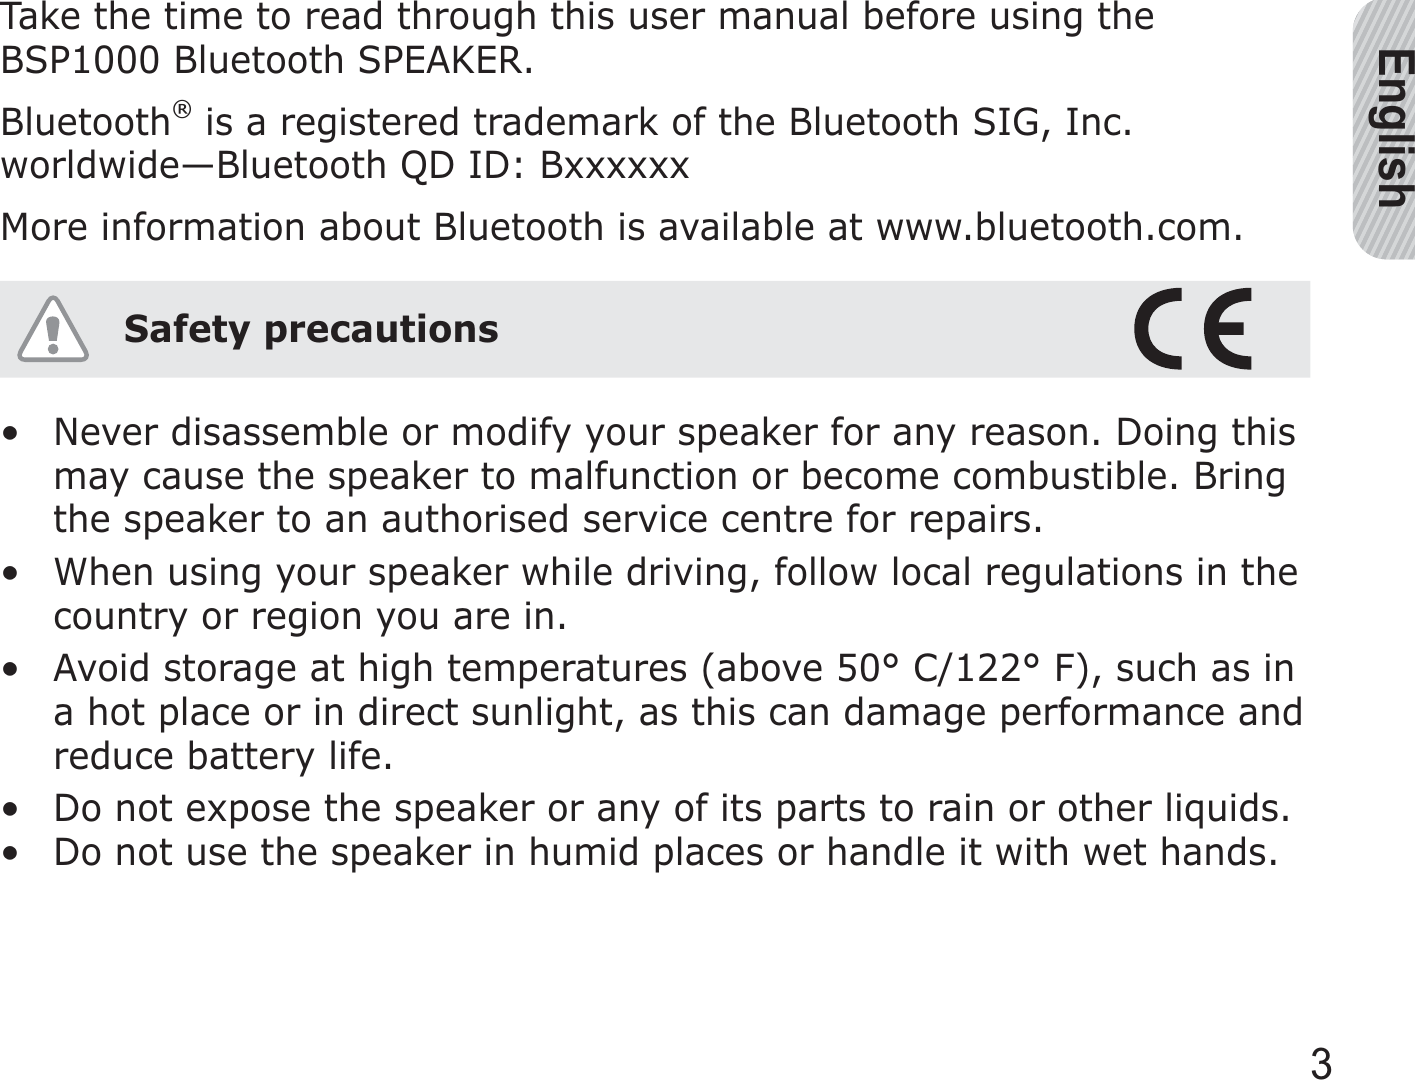 English3Take the time to read through this user manual before using the BSP1000 Bluetooth SPEAKER.Bluetooth® is a registered trademark of the Bluetooth SIG, Inc. worldwide—Bluetooth QD ID: BxxxxxxMore information about Bluetooth is available at www.bluetooth.com.Safety precautionsNever disassemble or modify your speaker for any reason. Doing this may cause the speaker to malfunction or become combustible. Bring the speaker to an authorised service centre for repairs.When using your speaker while driving, follow local regulations in the country or region you are in.Avoid storage at high temperatures (above 50° C/122° F), such as in a hot place or in direct sunlight, as this can damage performance and reduce battery life.Do not expose the speaker or any of its parts to rain or other liquids.Do not use the speaker in humid places or handle it with wet hands.•••••